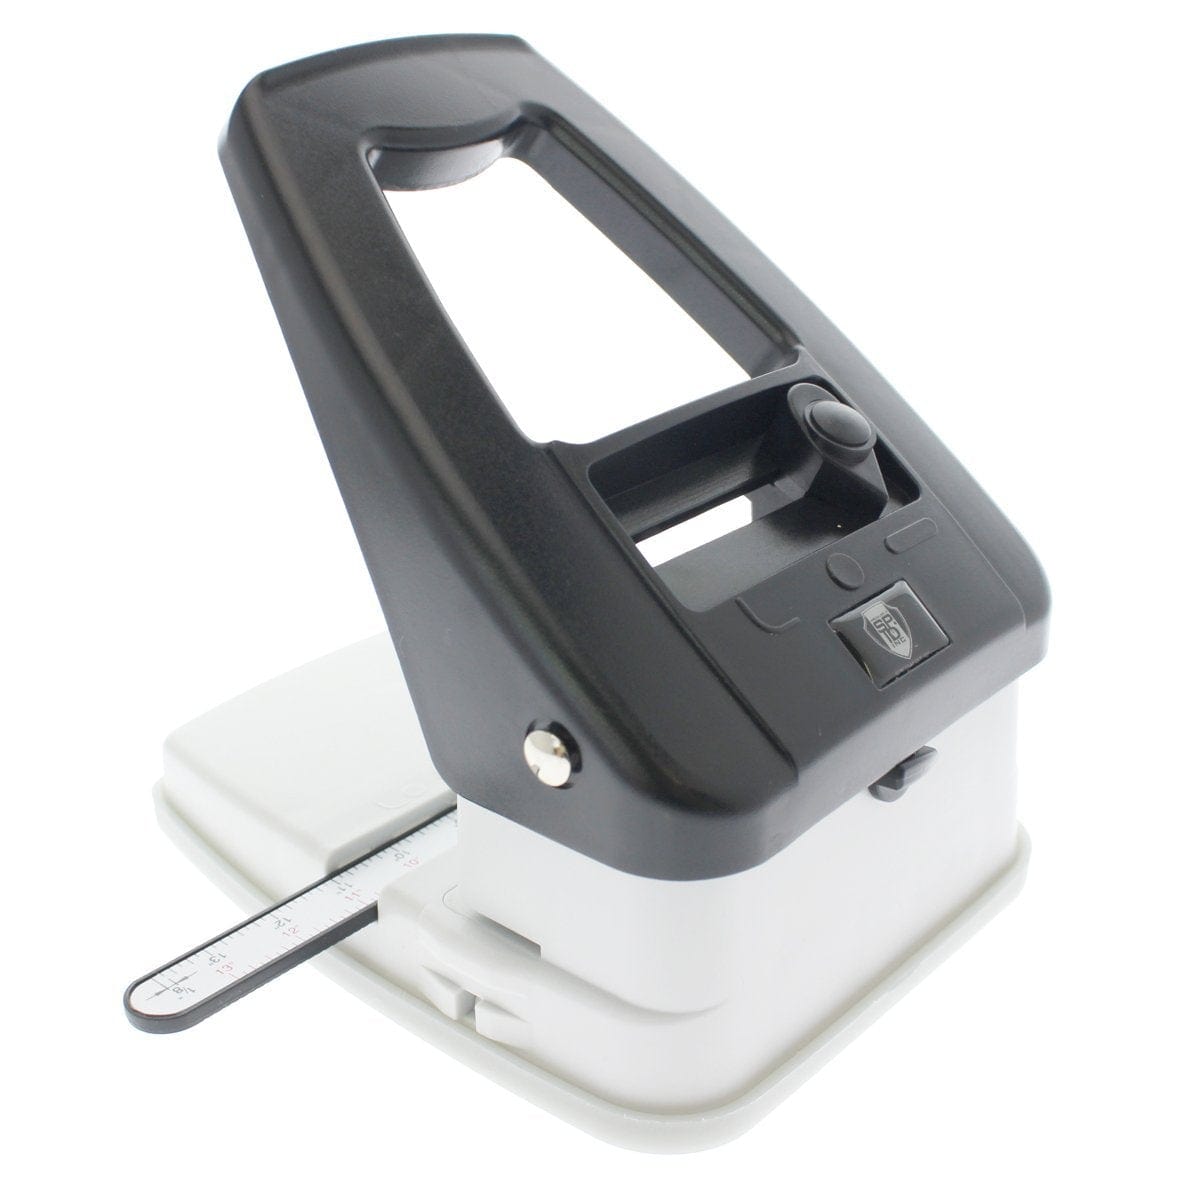 Handheld 3-in1 Plastic Card Slot Hole Punch (3943-1520)